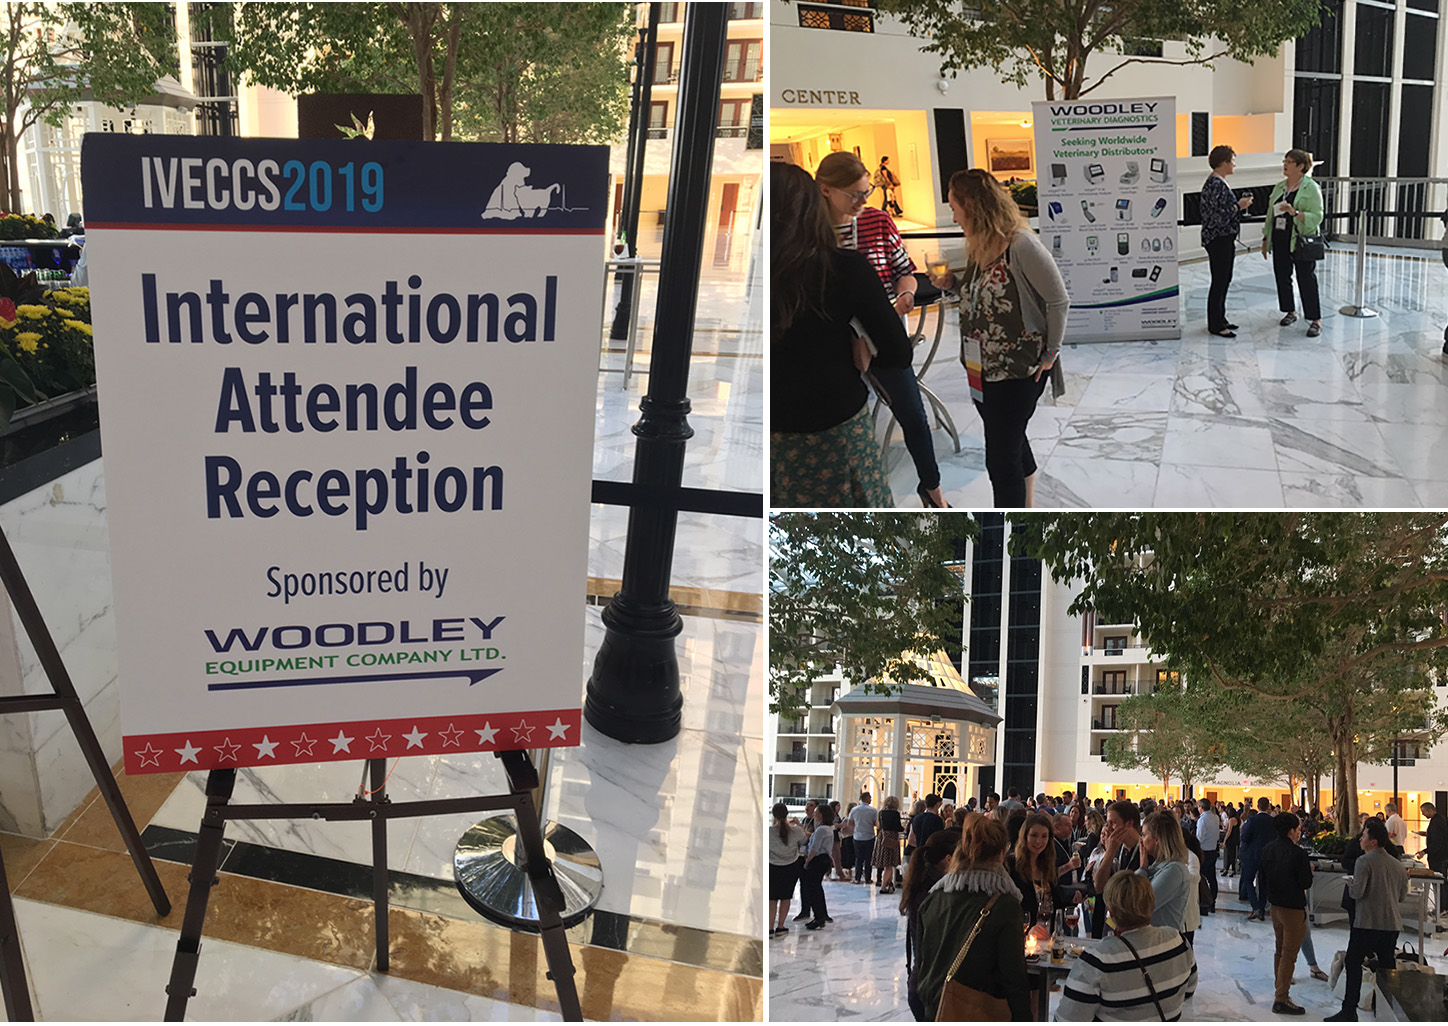 Woodley Sponsor the IVECCS 2019 International Attendee Reception